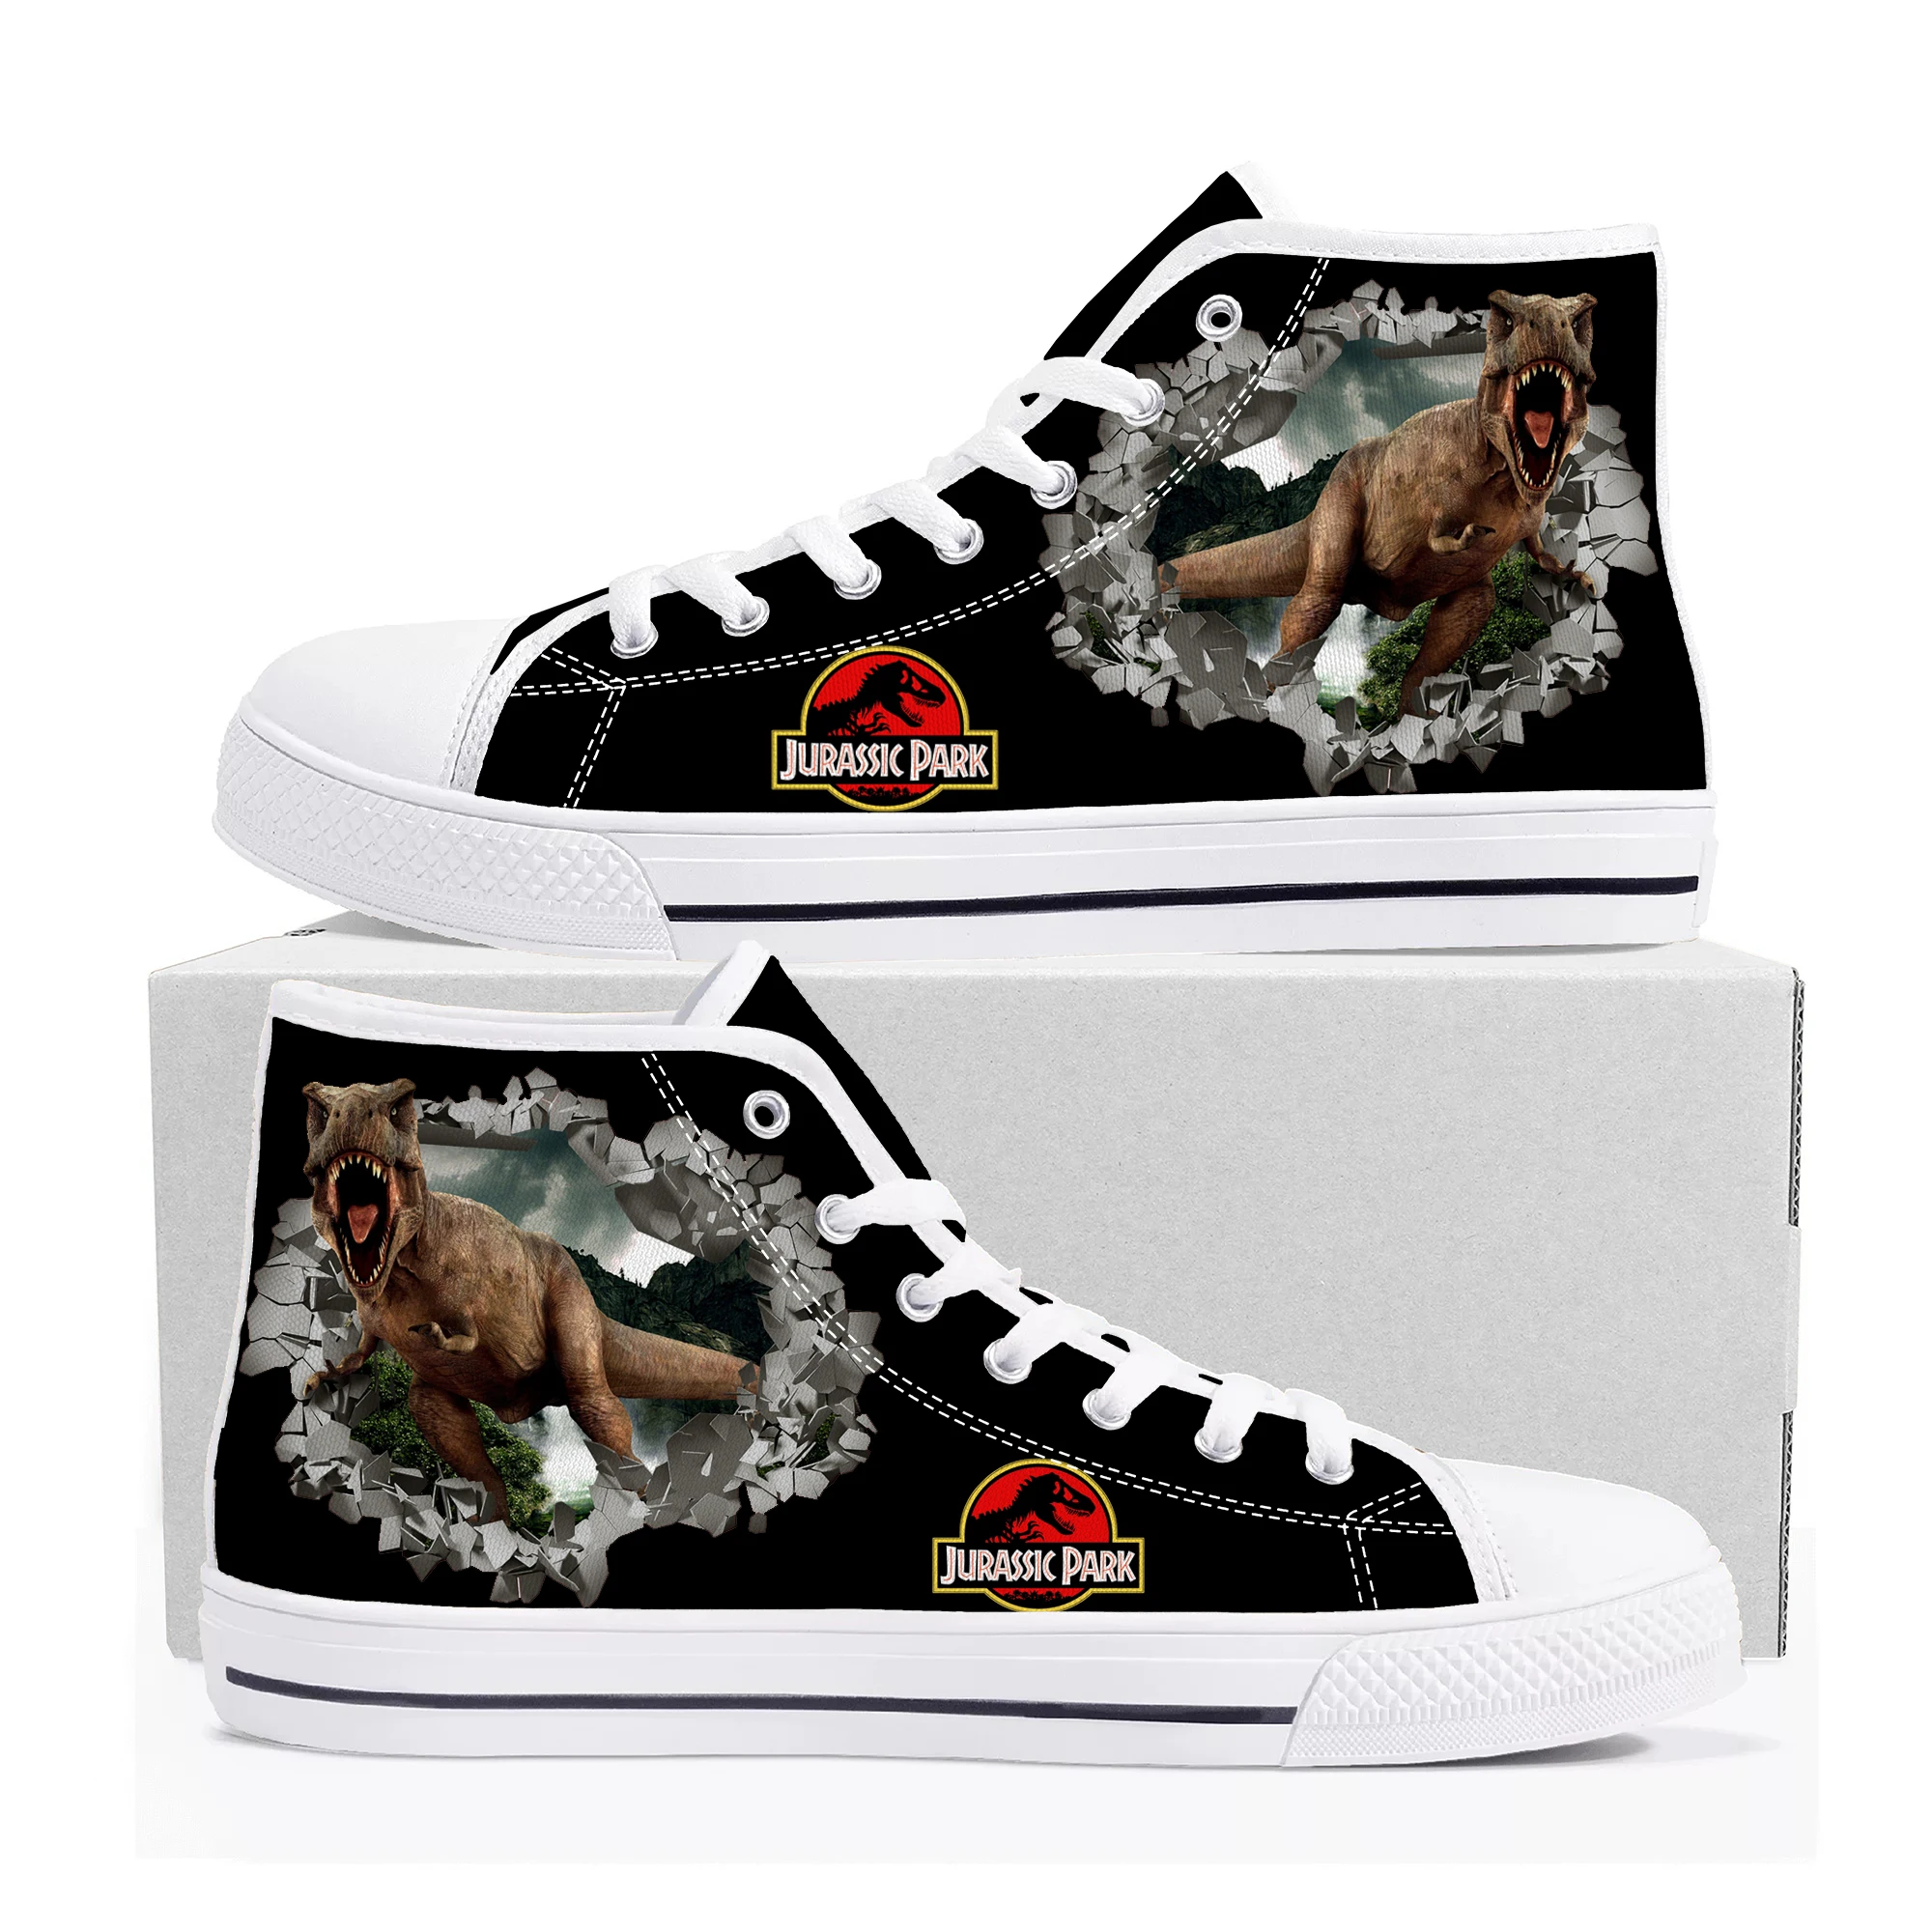 

Dinosaur World Jurassic Park High Top Sneakers High Quality Mens Womens Teenager Canvas Sneaker Casual Couple Shoes Custom Shoe